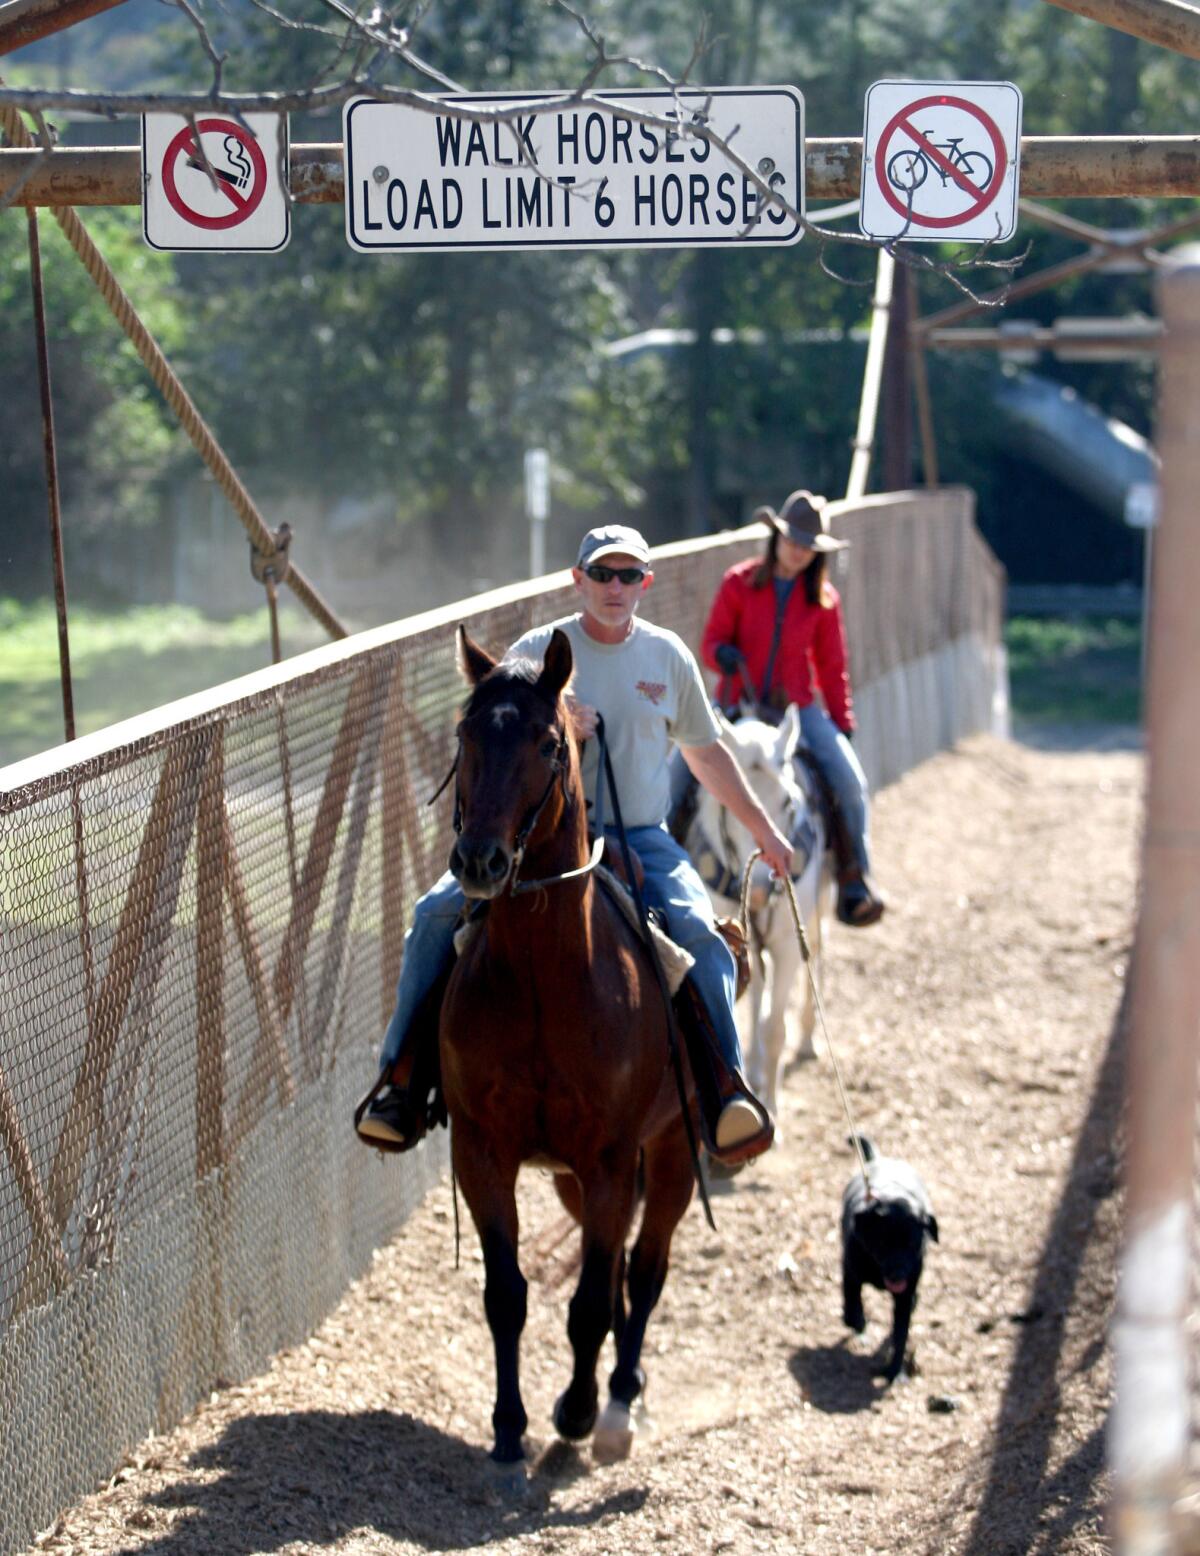 The Mariposa bridge is at the terminus of Mariposa Street at Valleyheart Dr. next to Circle K Ranch and is used to cross into the city of Los Angeles horse trails.